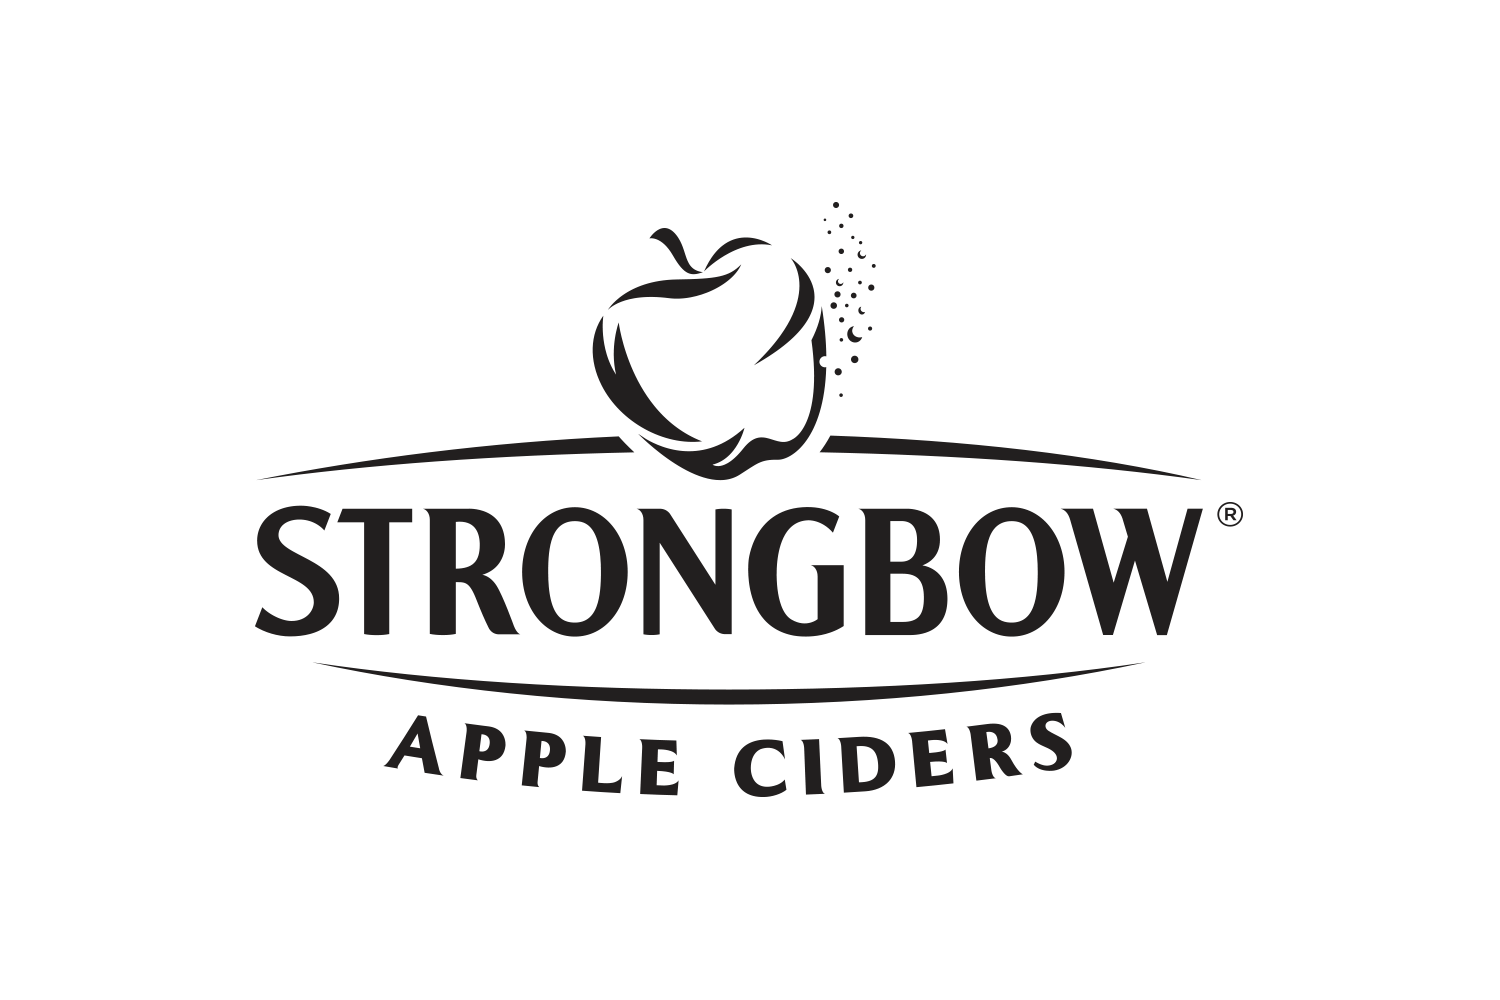 Strongbow Logo - Serviceplan International becomes lead agency for Strongbow Apple